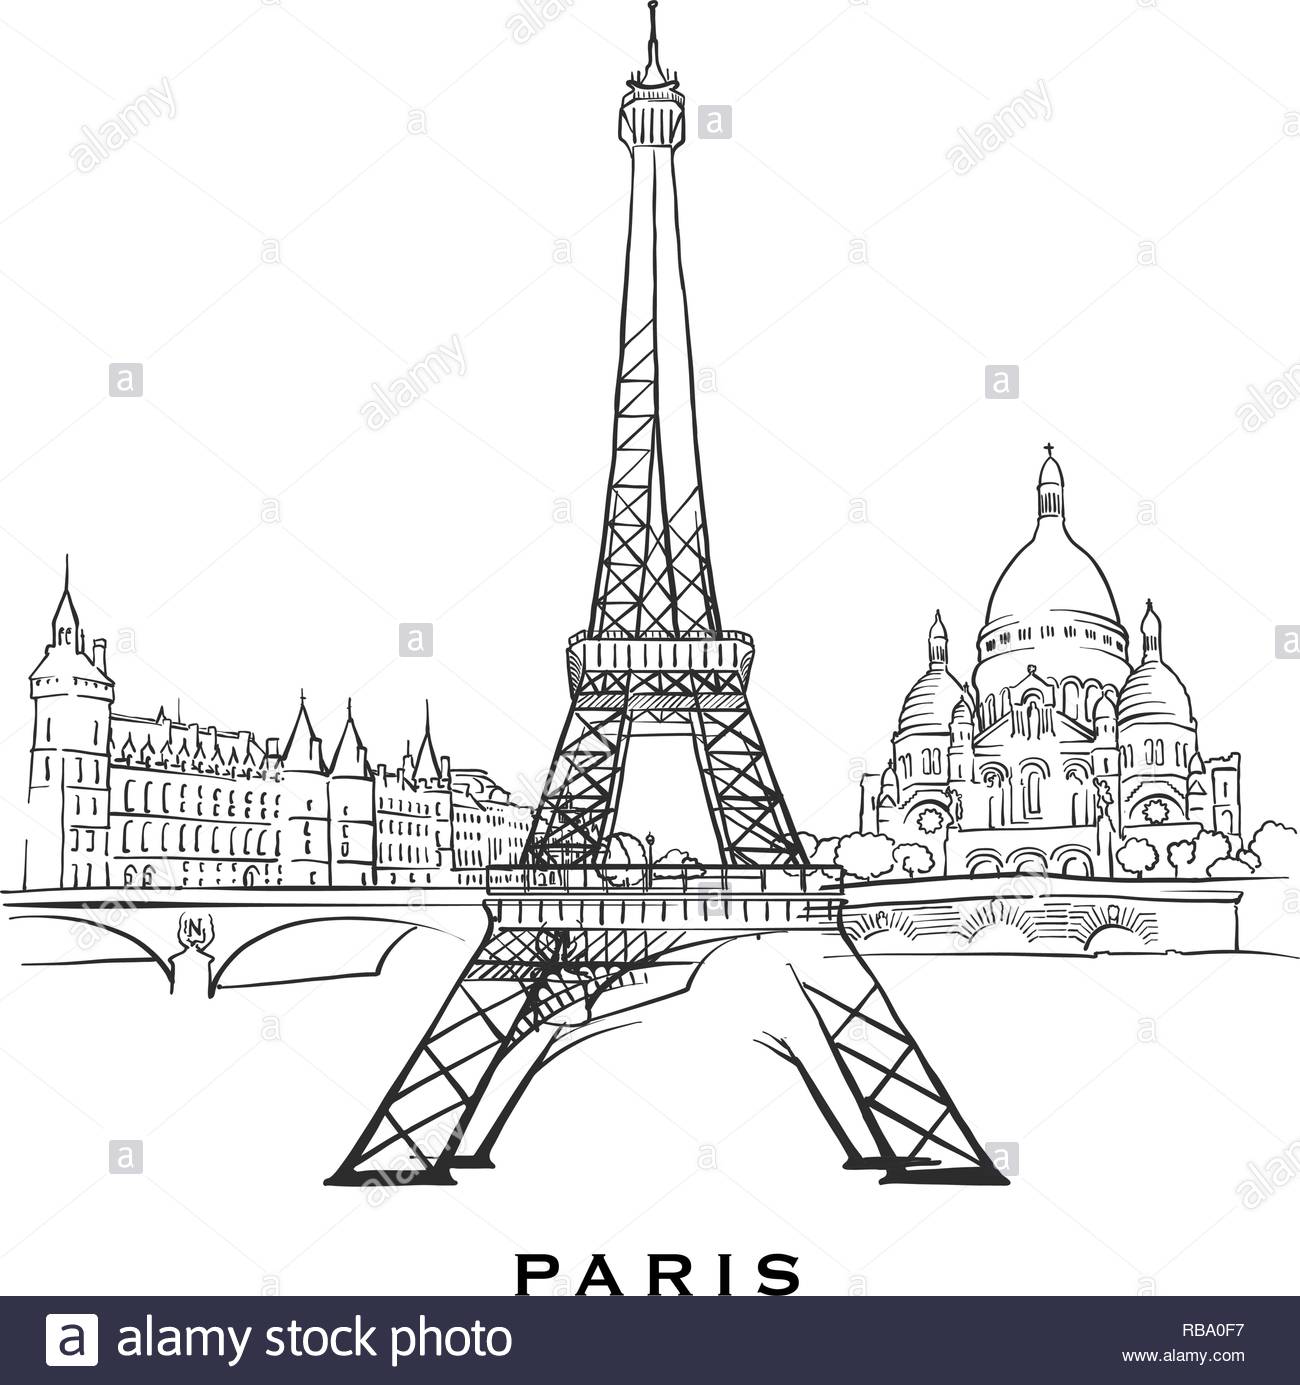 Paris France Famous Architecture Outlined Vector Sketch Separated